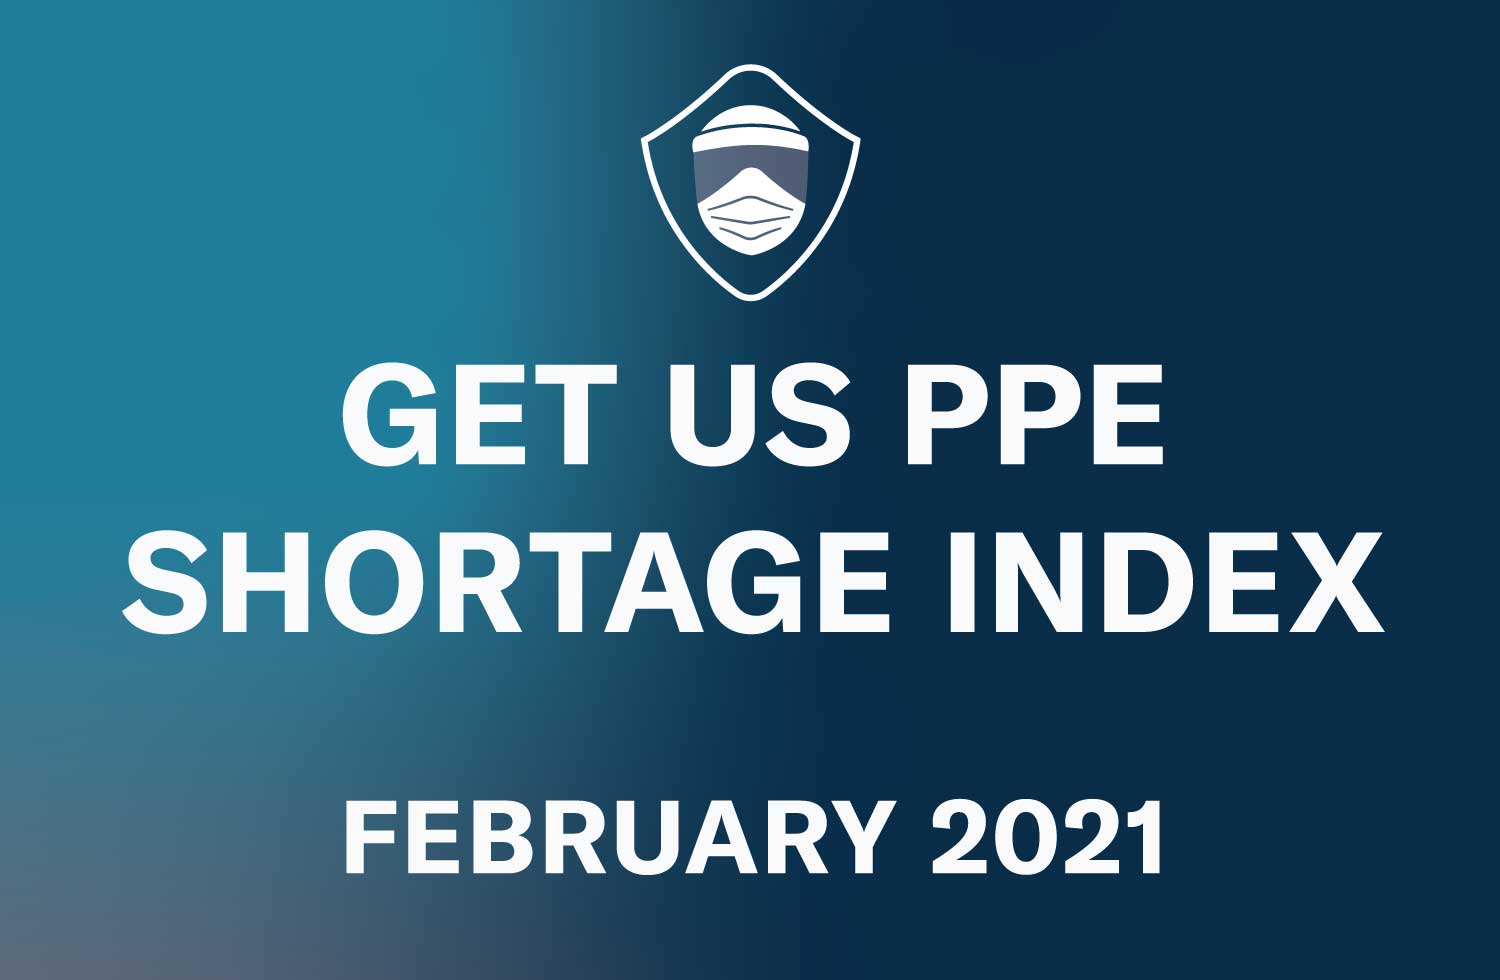 Get Us PPE Shortage Index February 2021 featured image